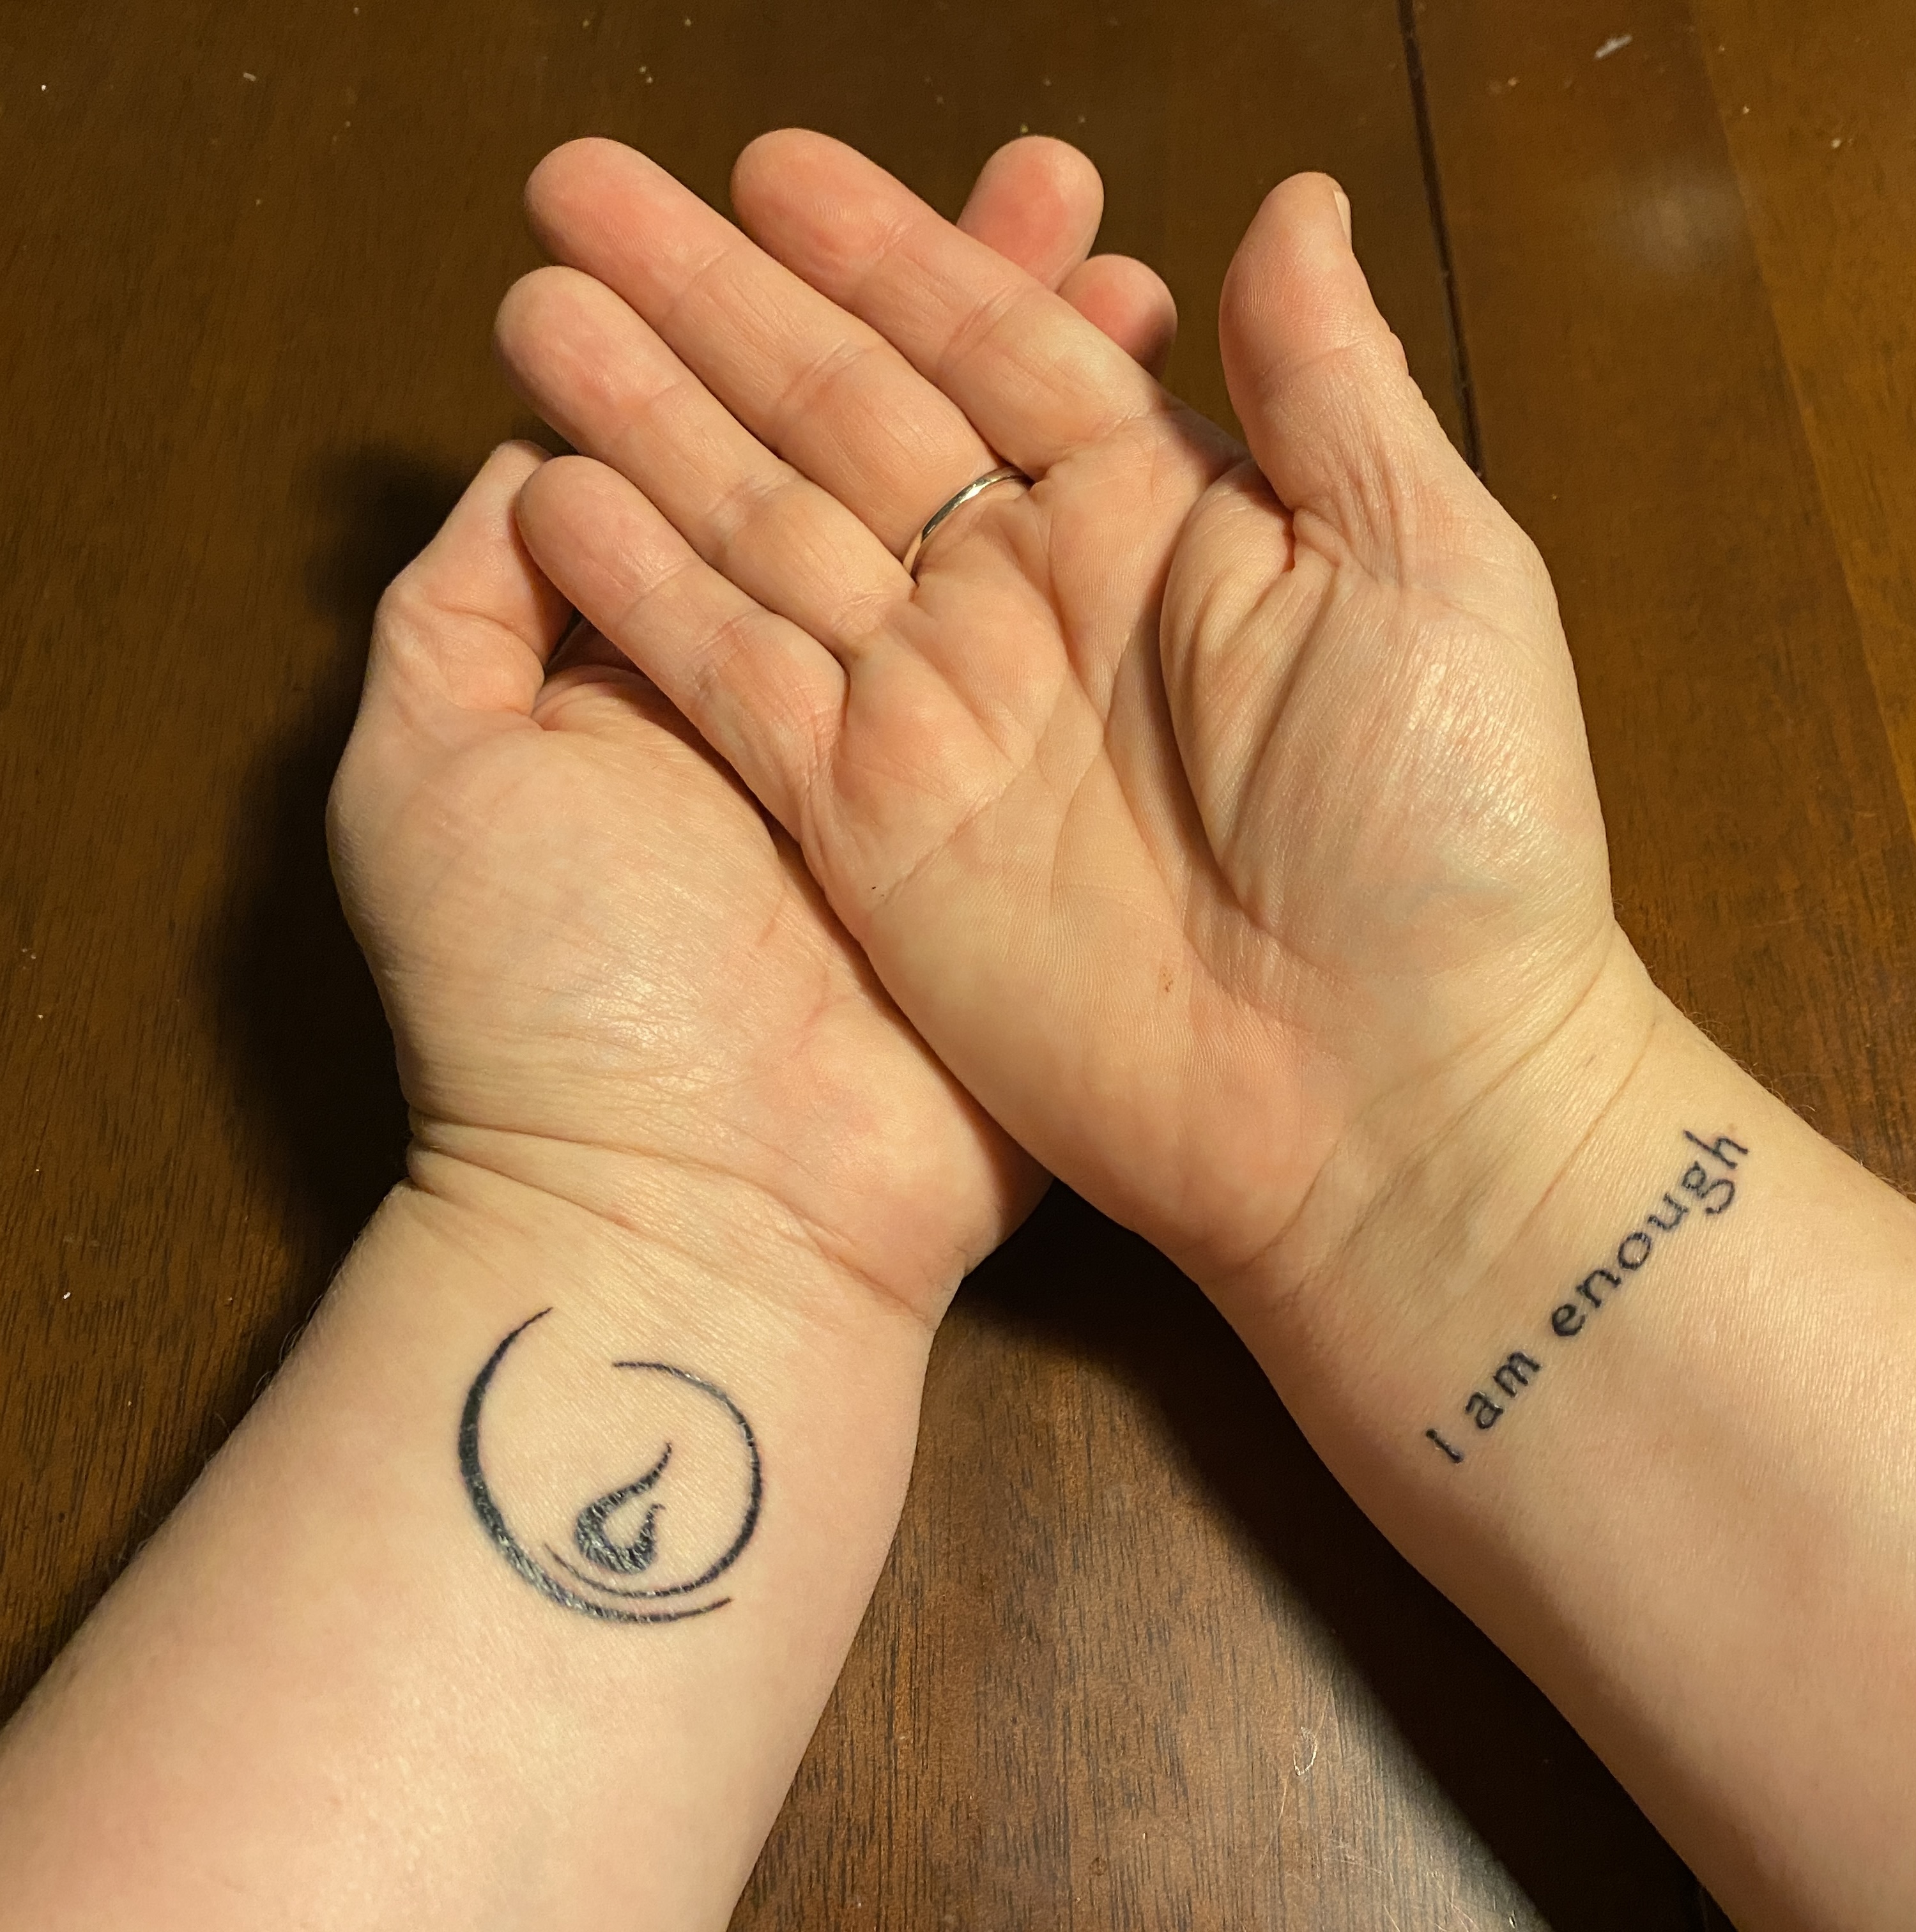 Two hands belonging to Bailey, a white woman, crossed with palms up. One wrist has a chalice flame tattoo, and the other has a tattoo reading I am enough